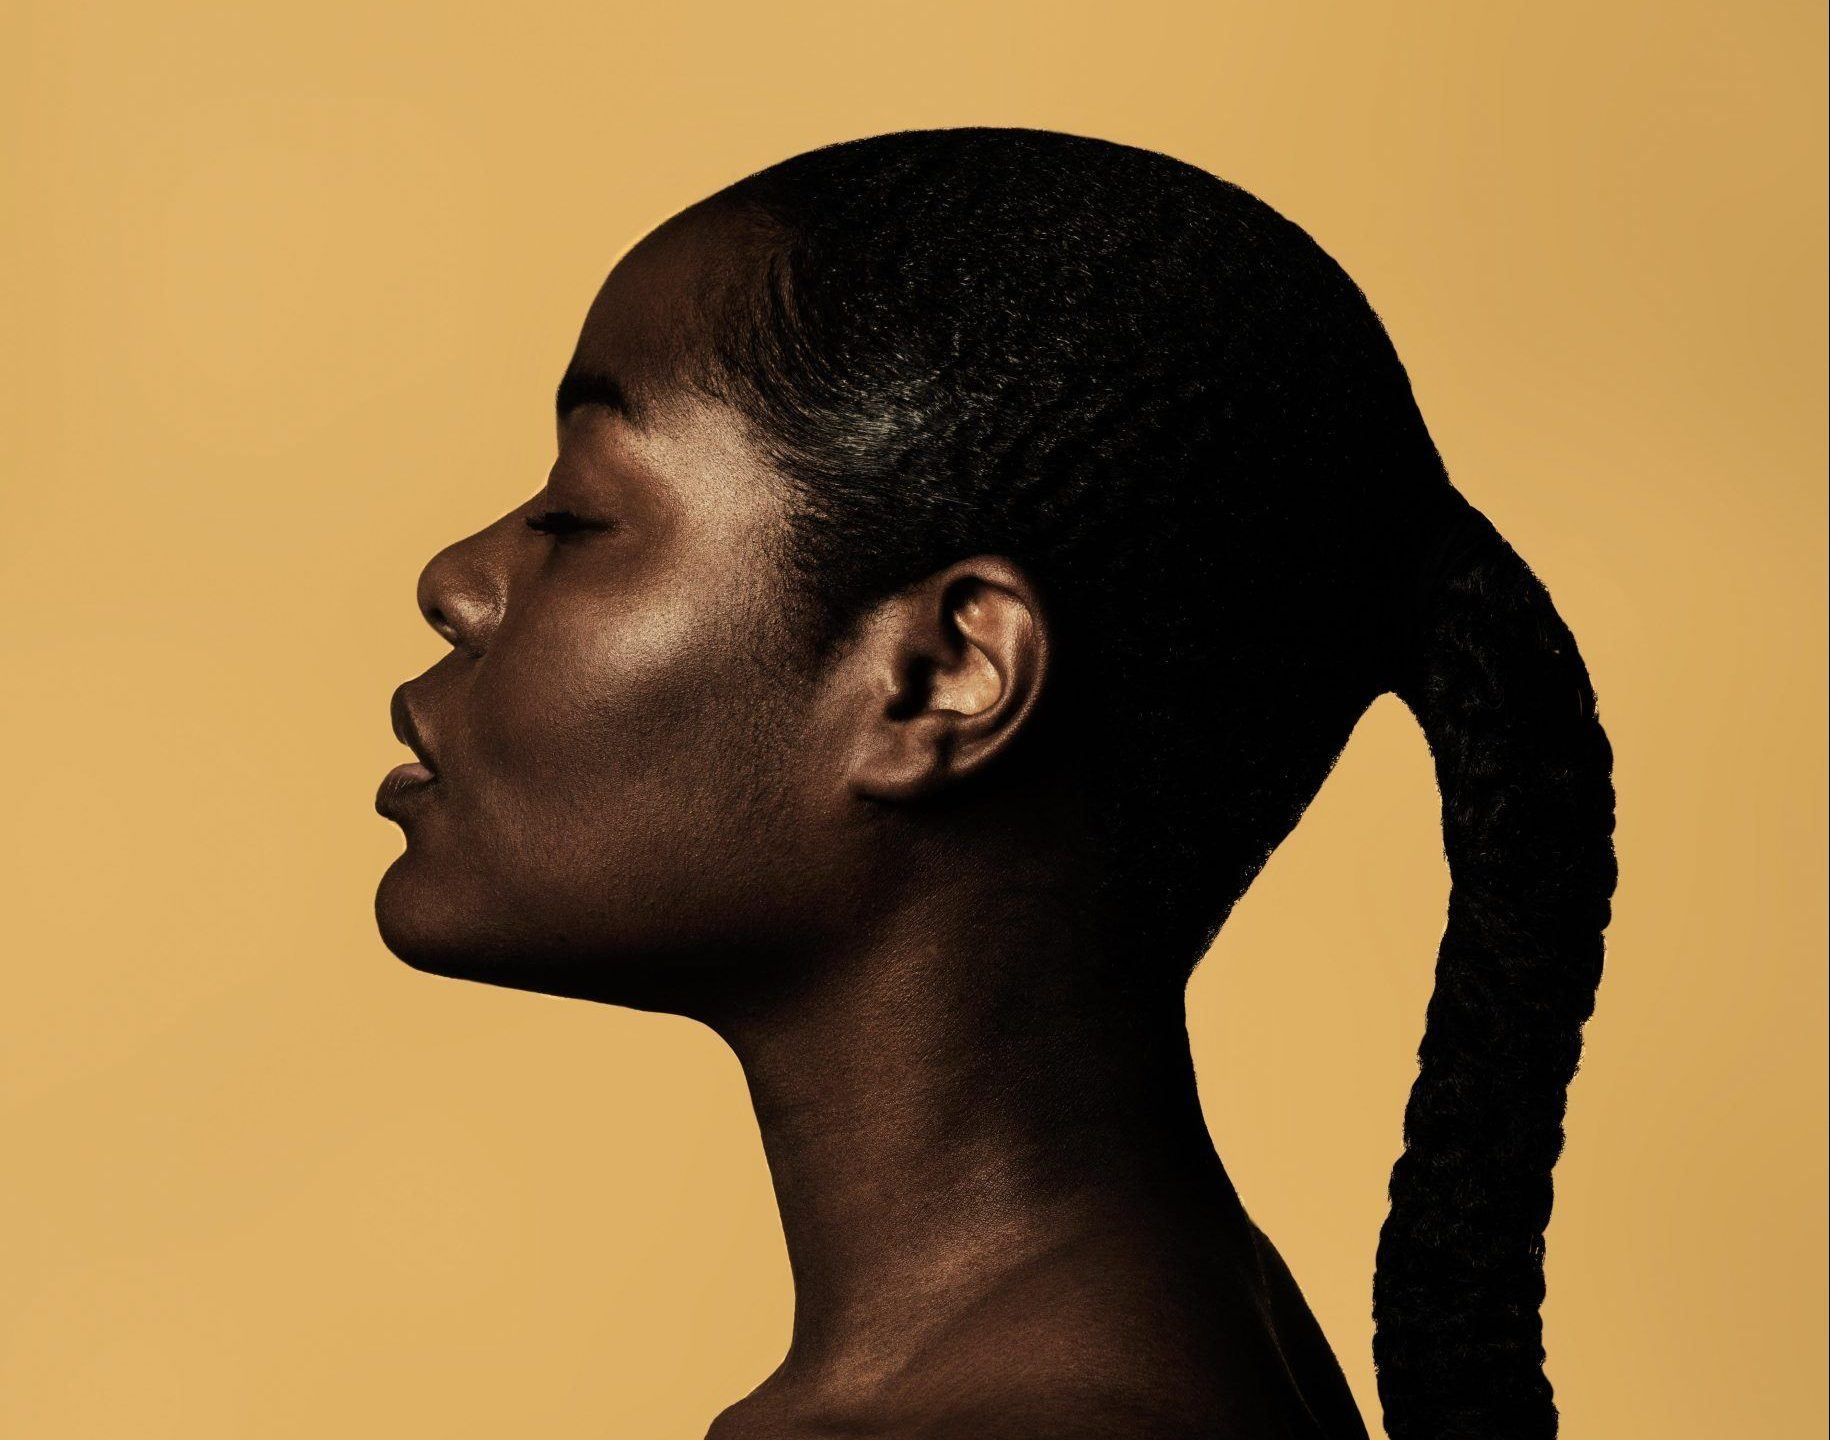 A Beauty Guide To Looking After Melanin-Rich Skin